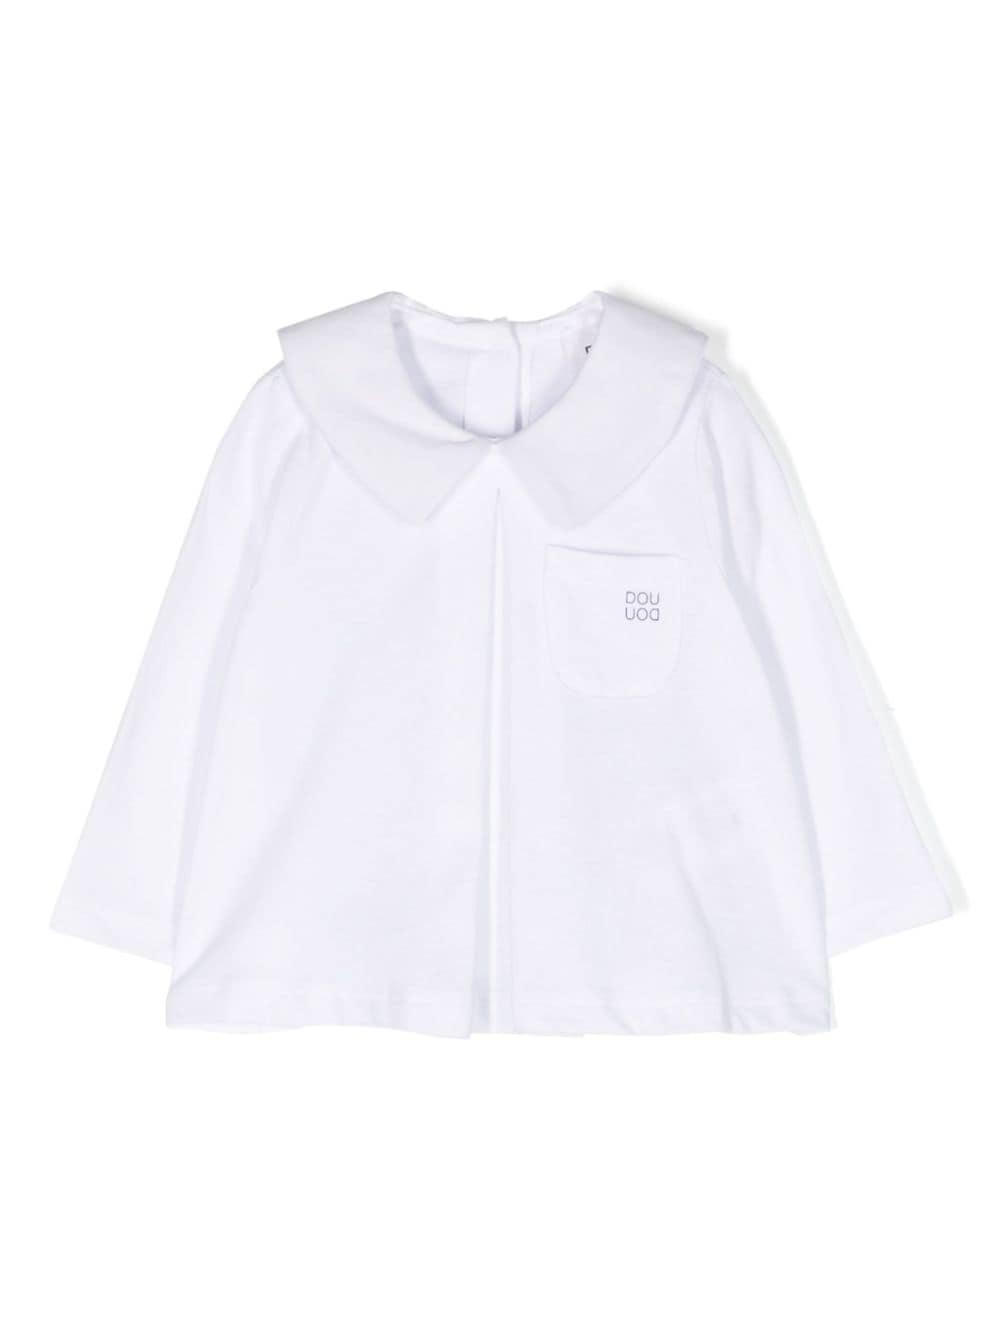 White blouse for girls with logo